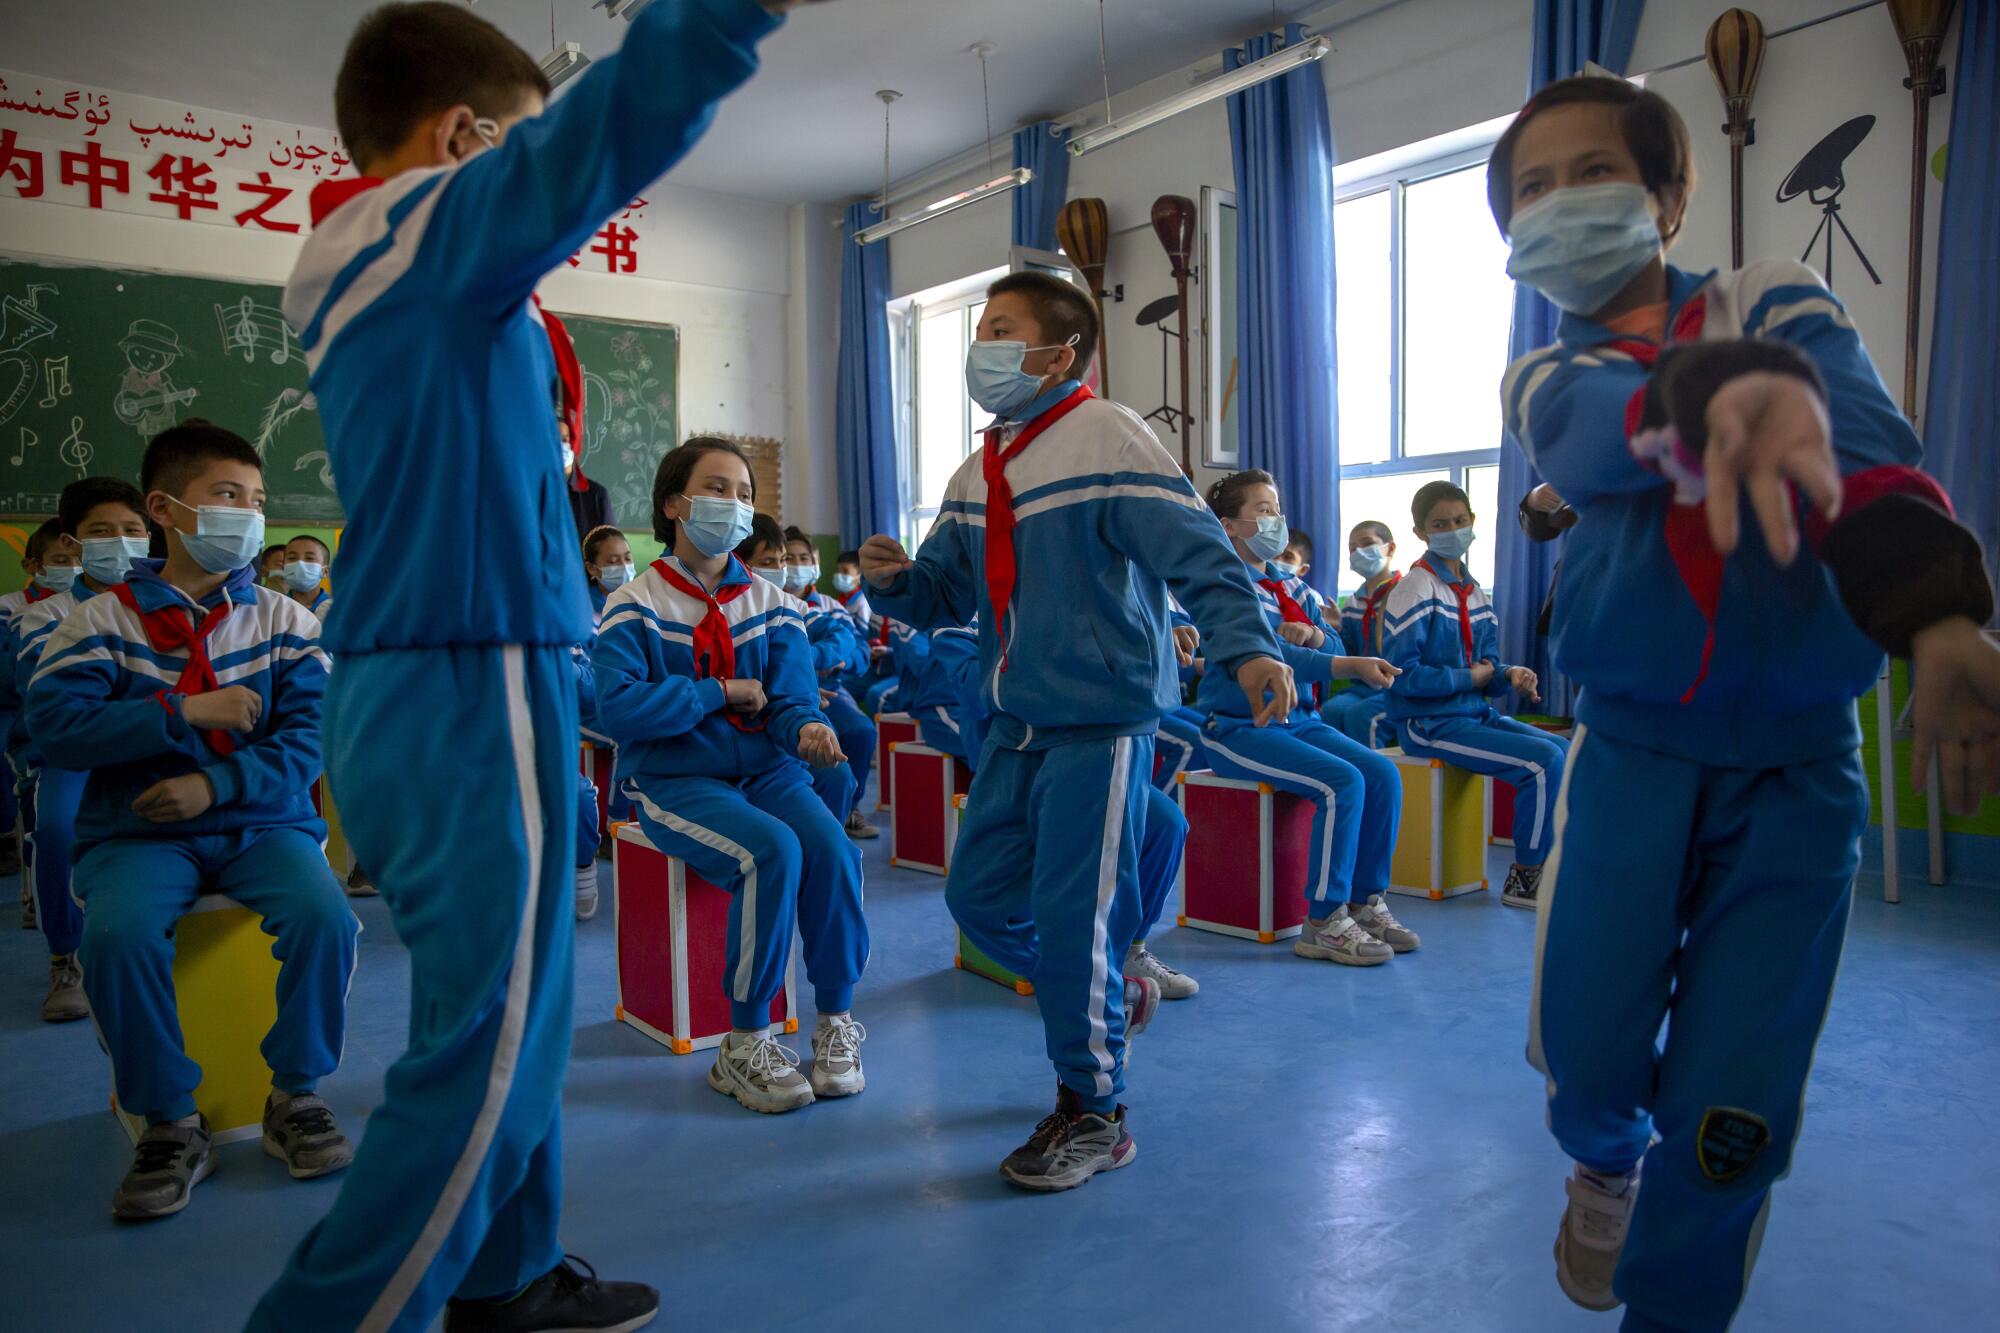 Schoolchildren in light blue and white uniforms with red scarves dance in a classroom 